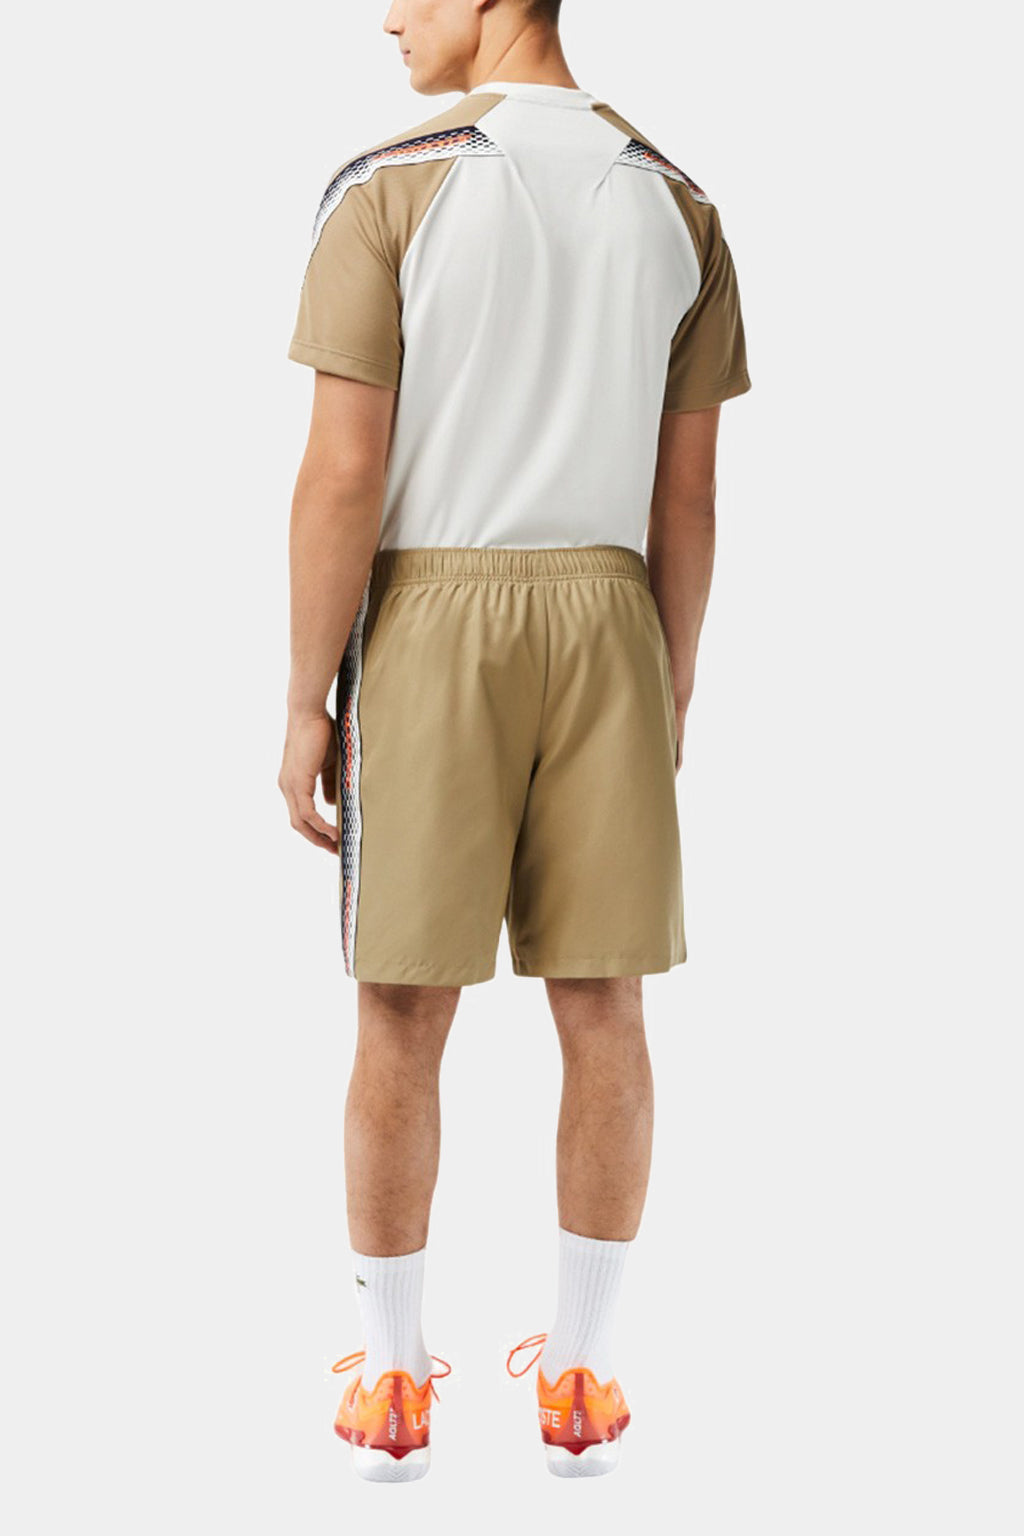 Lacoste - Men’s Lacoste Recycled Polyester Tennis Shorts